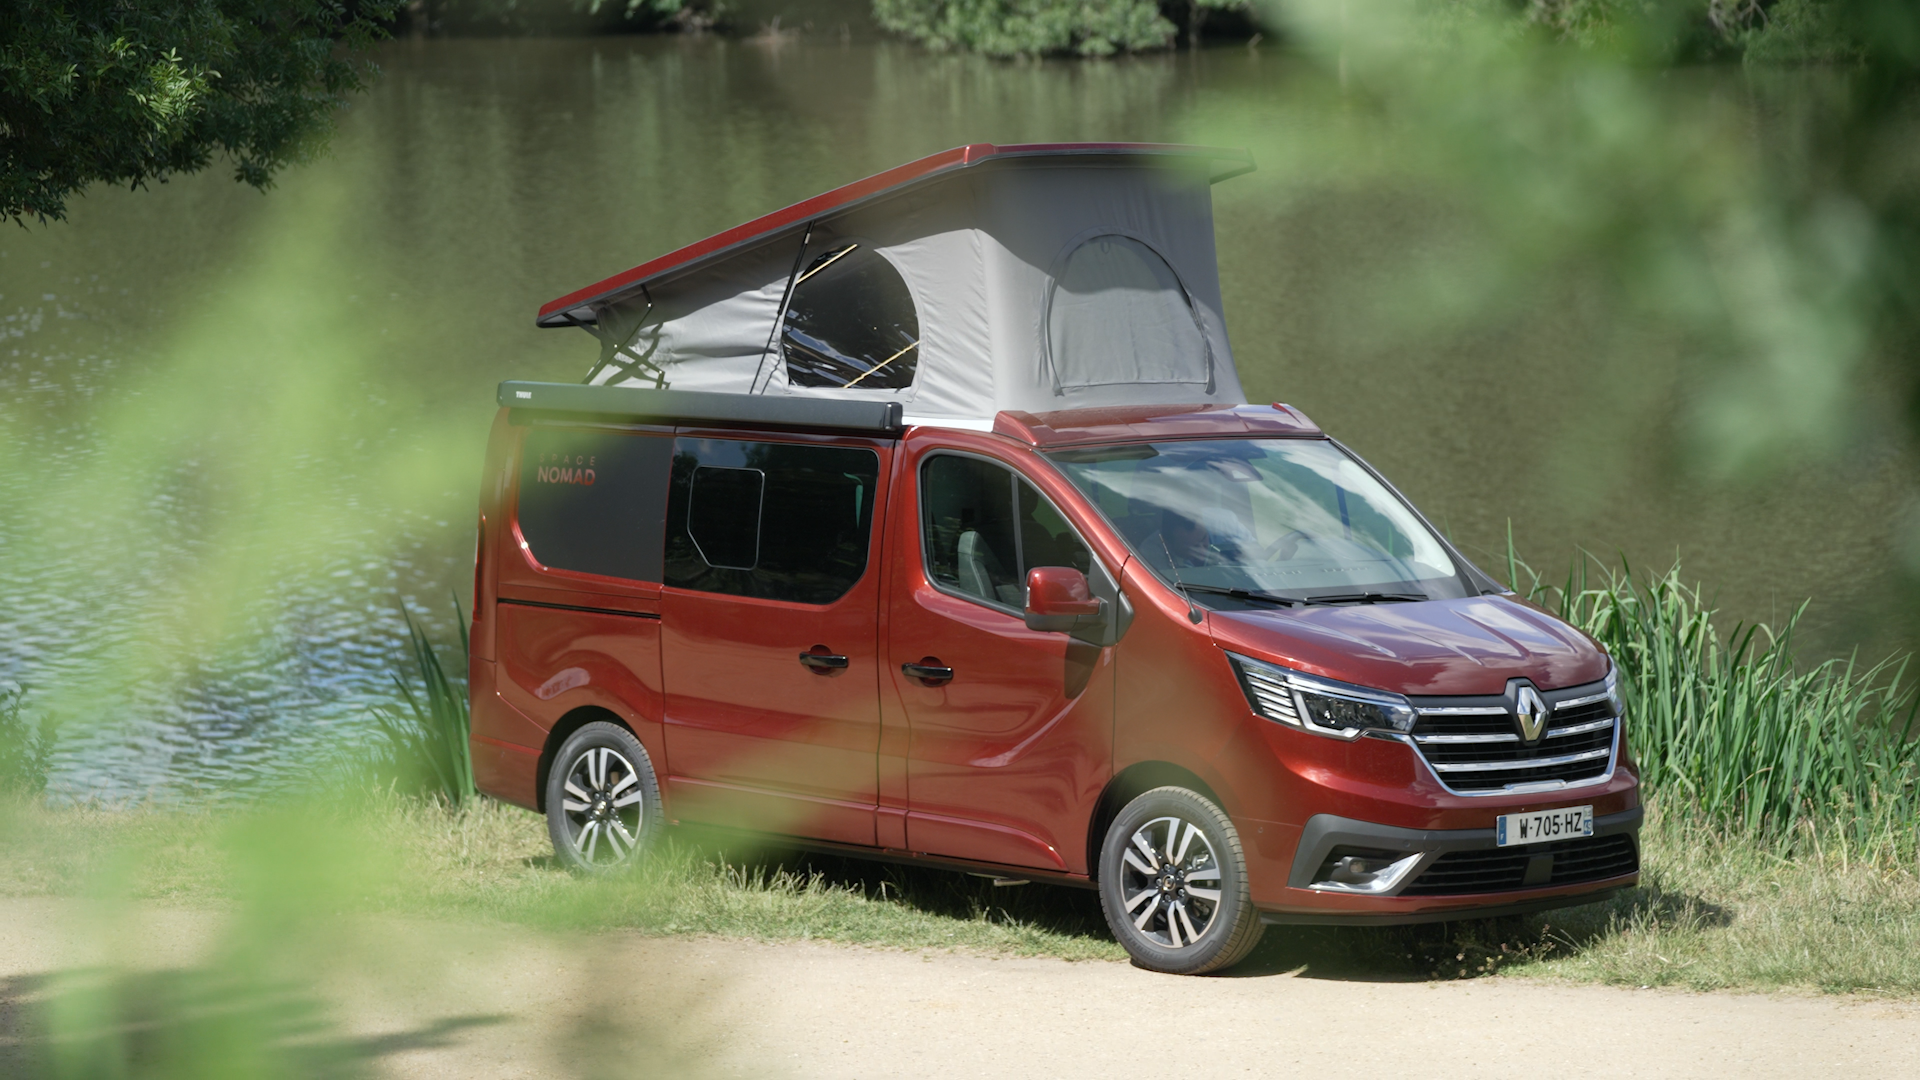 All-new Renault Trafic SpaceNomad: a solar panel for more freedom - Renault  Group